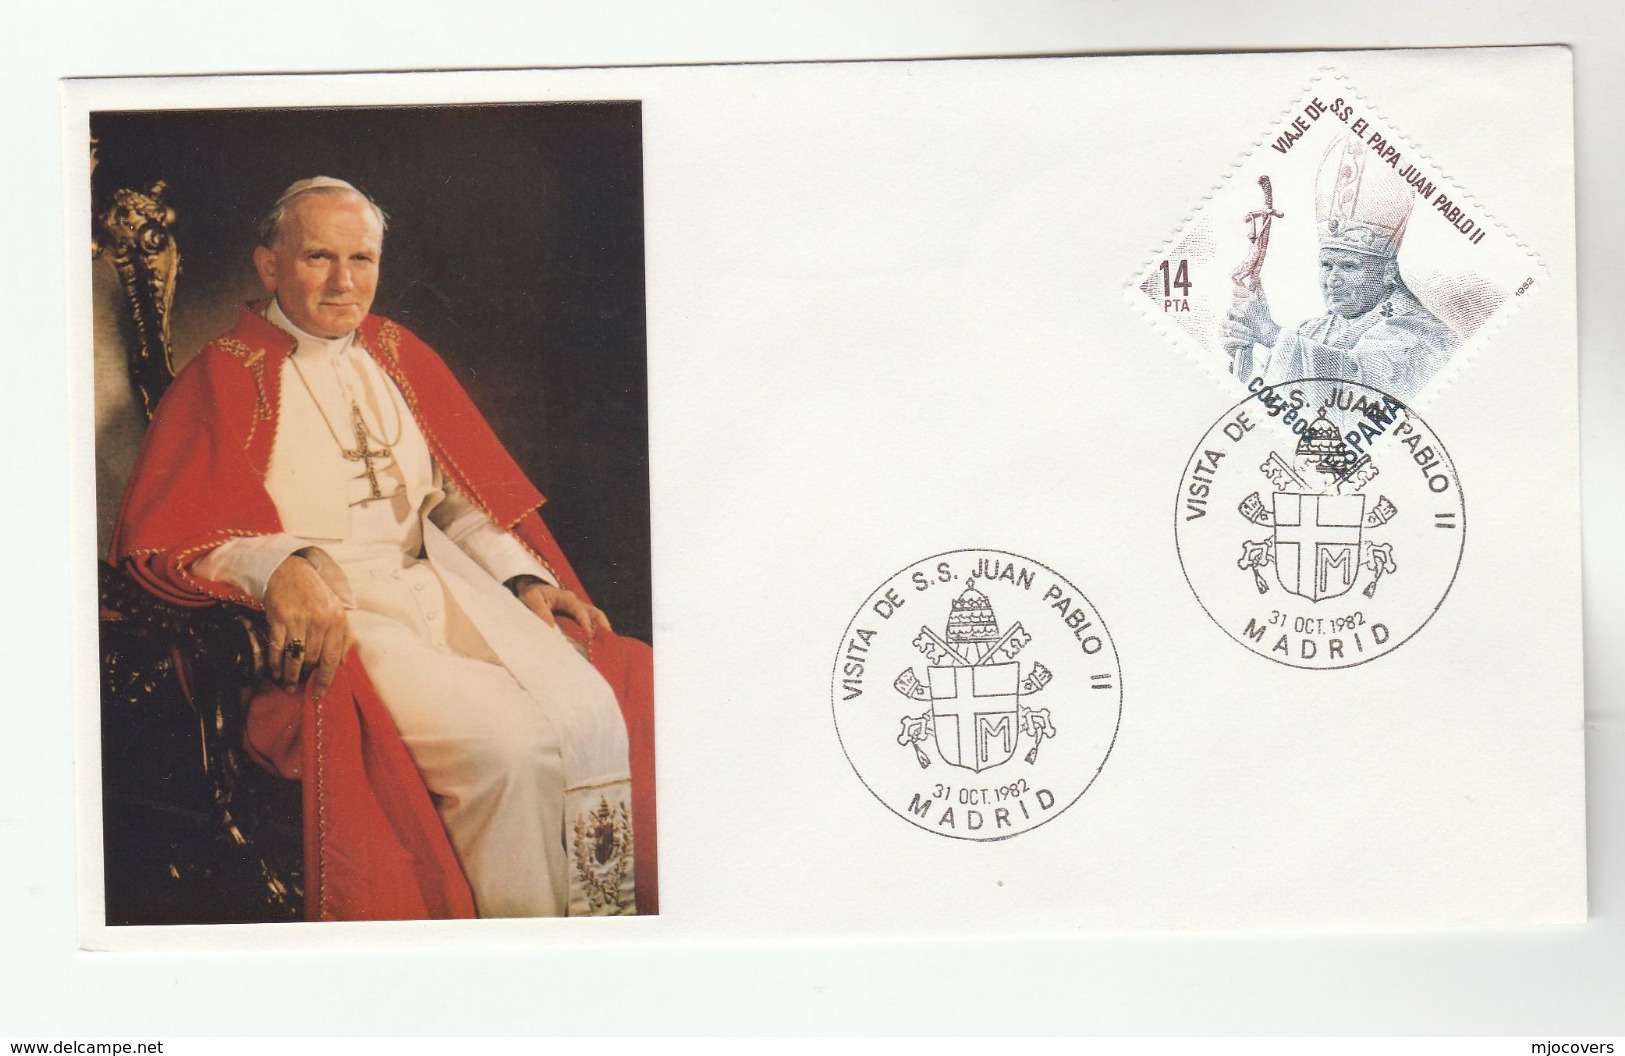 1982 SPAIN MADRID Special POPE  EVENT COVER - JOHN PAUL II VISIT,   Religion Christianity Stamps Heraldic - Covers & Documents